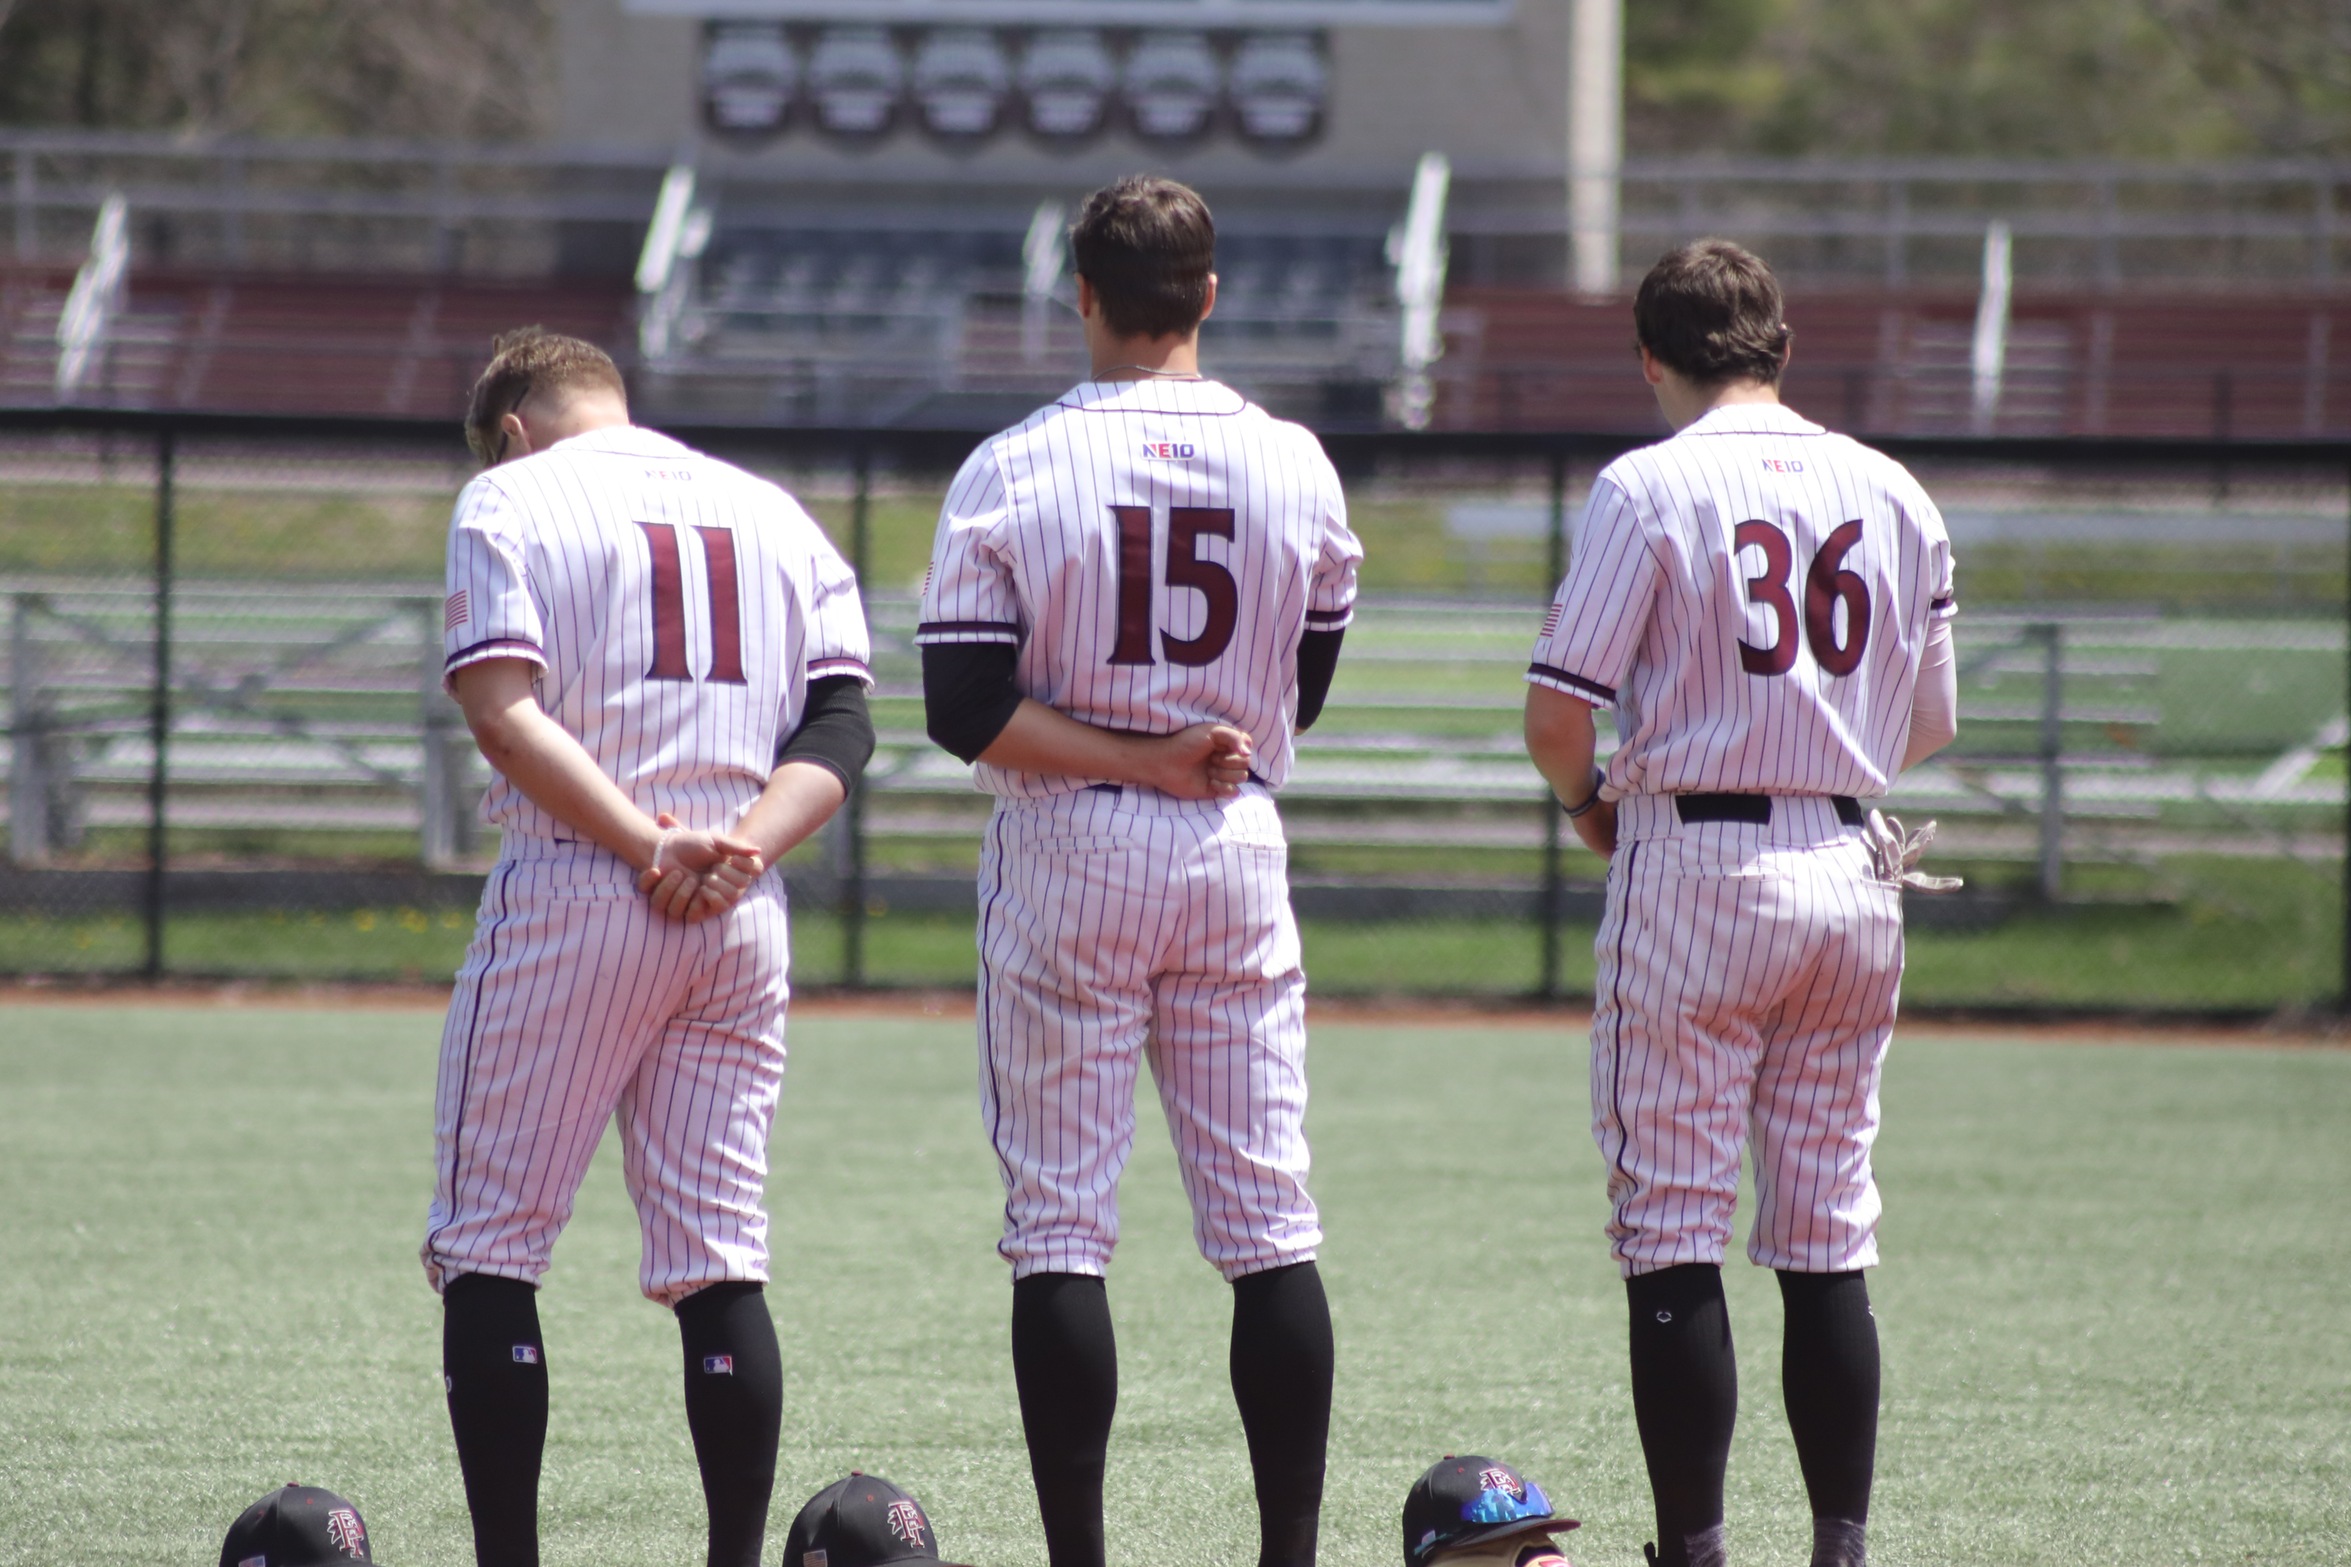 Baseball Disrupted by 8-0 Loss at Le Moyne College to Open NE10 Championship Weekend